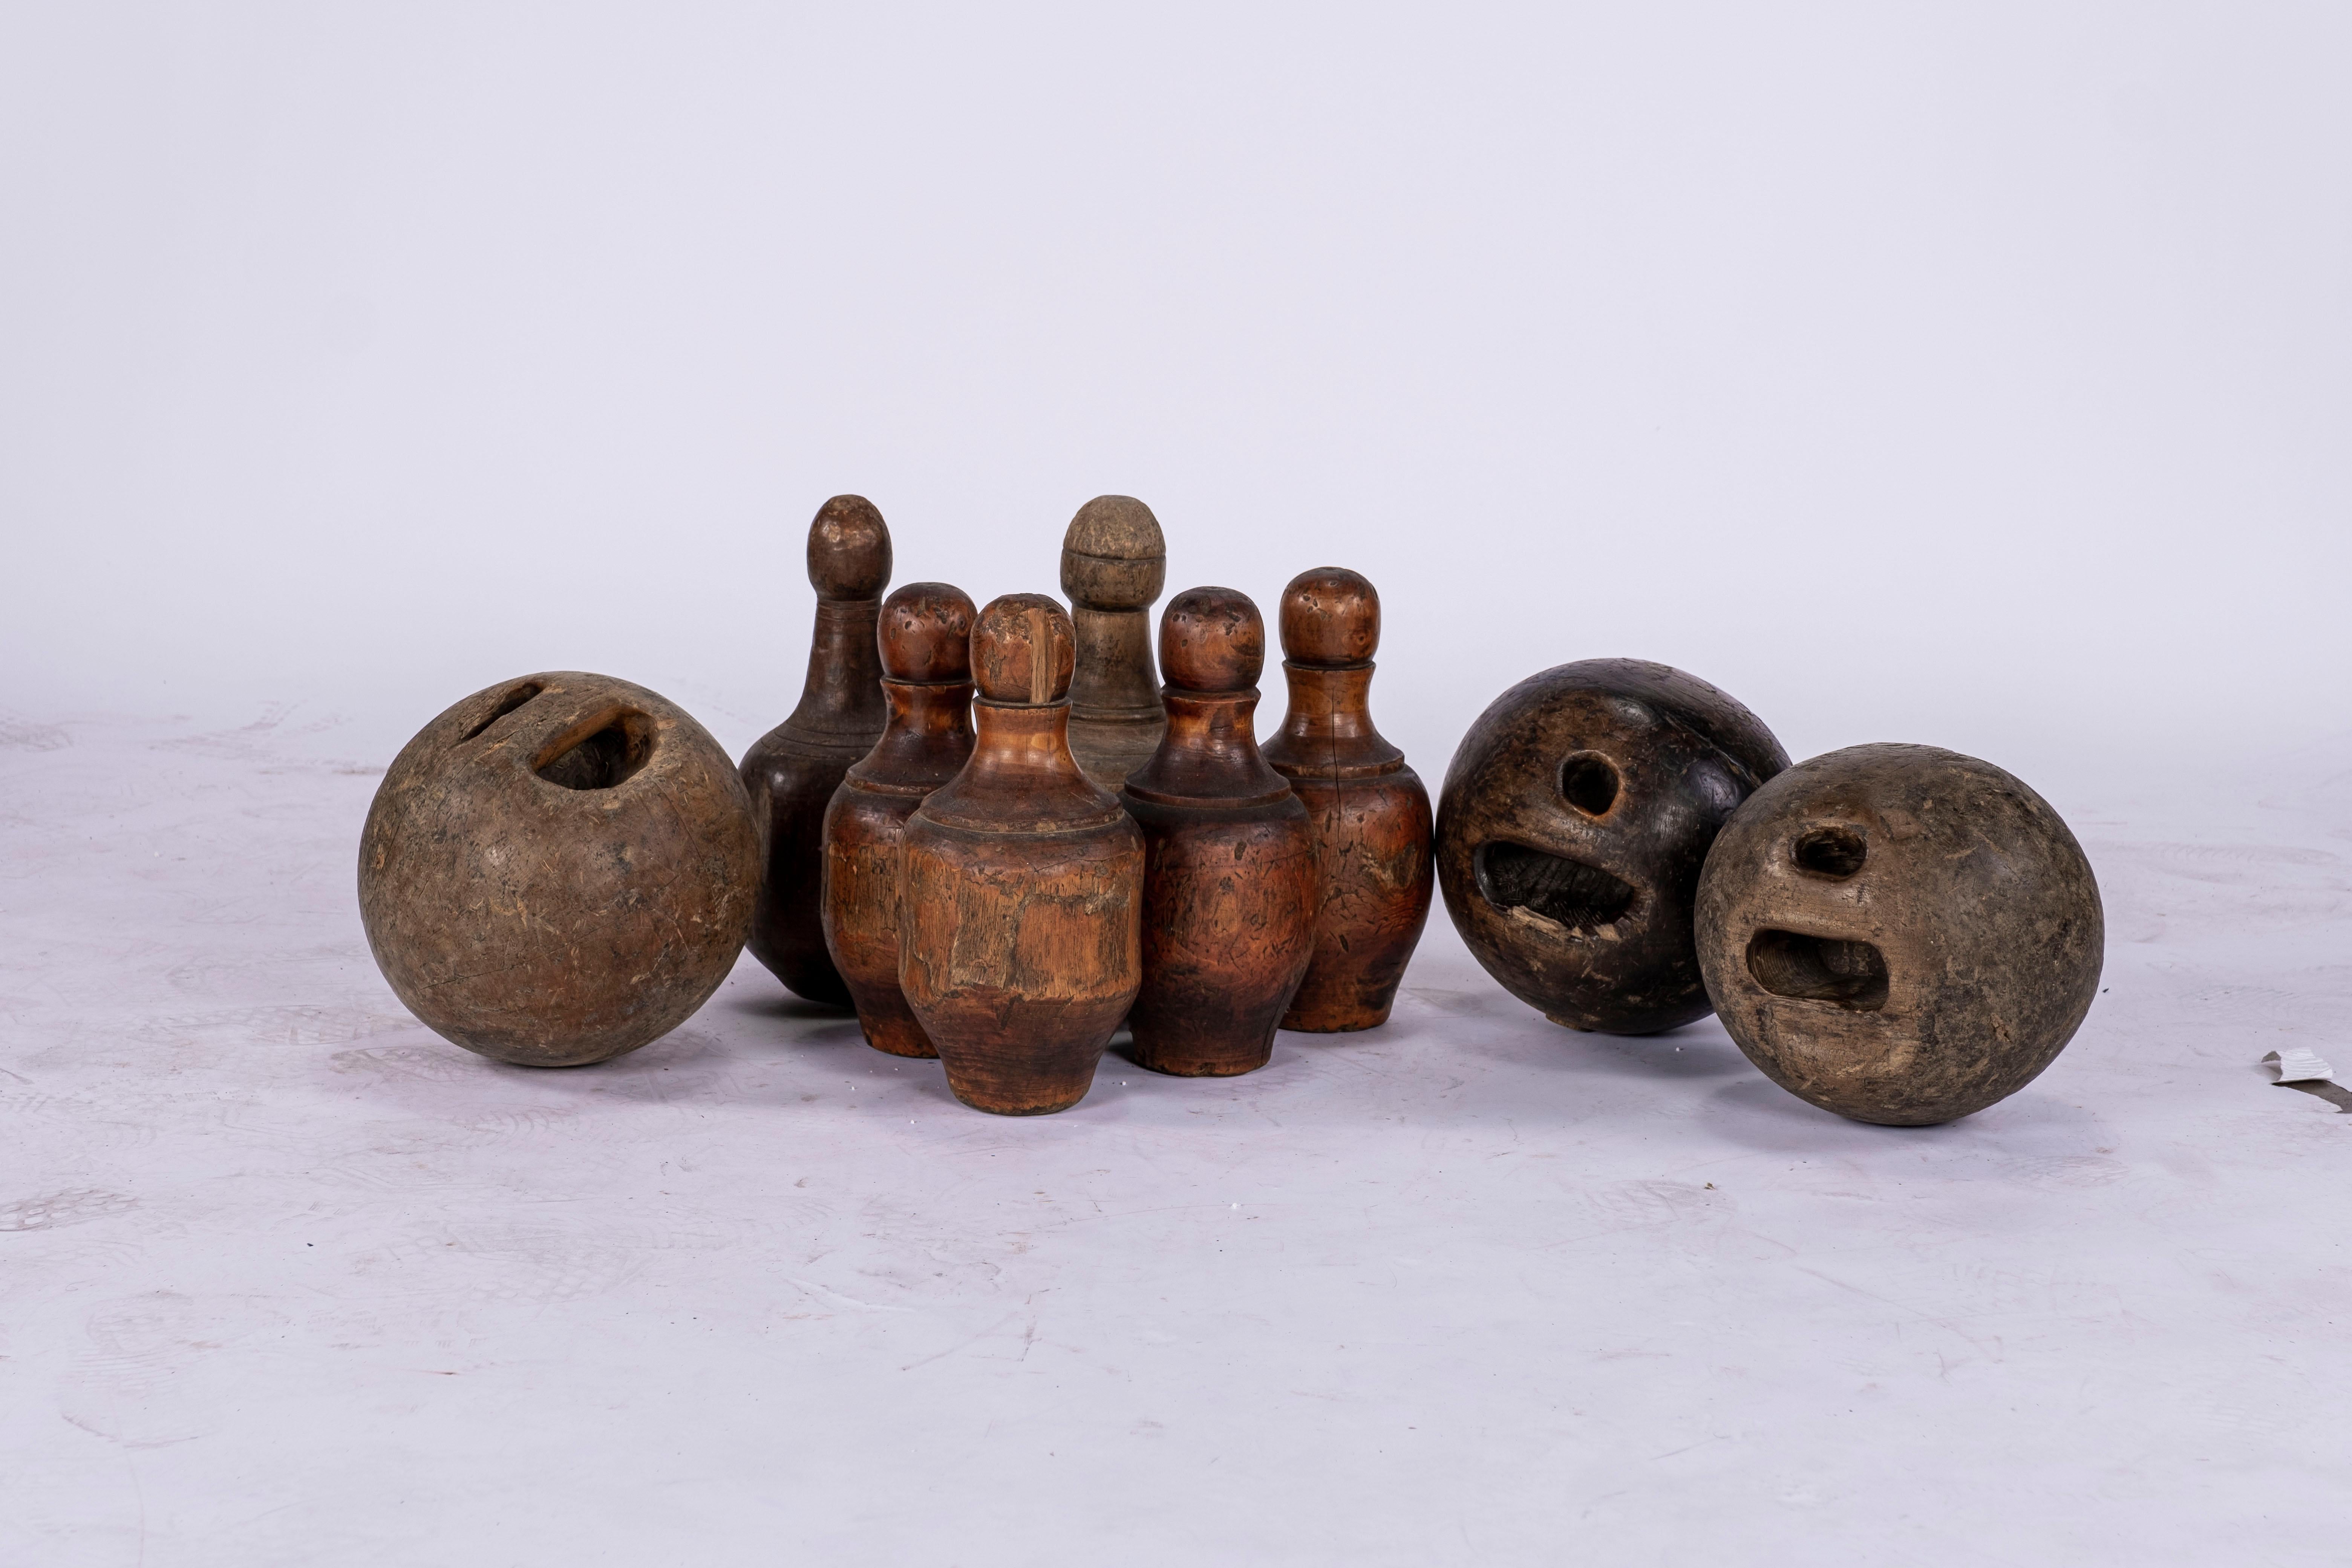 19th century French bistro lawn bowling set. 6 pins and 3 bowling balls. Bowling Balls are smooth where the fingers have been placed. Various sizes of pins and balls.